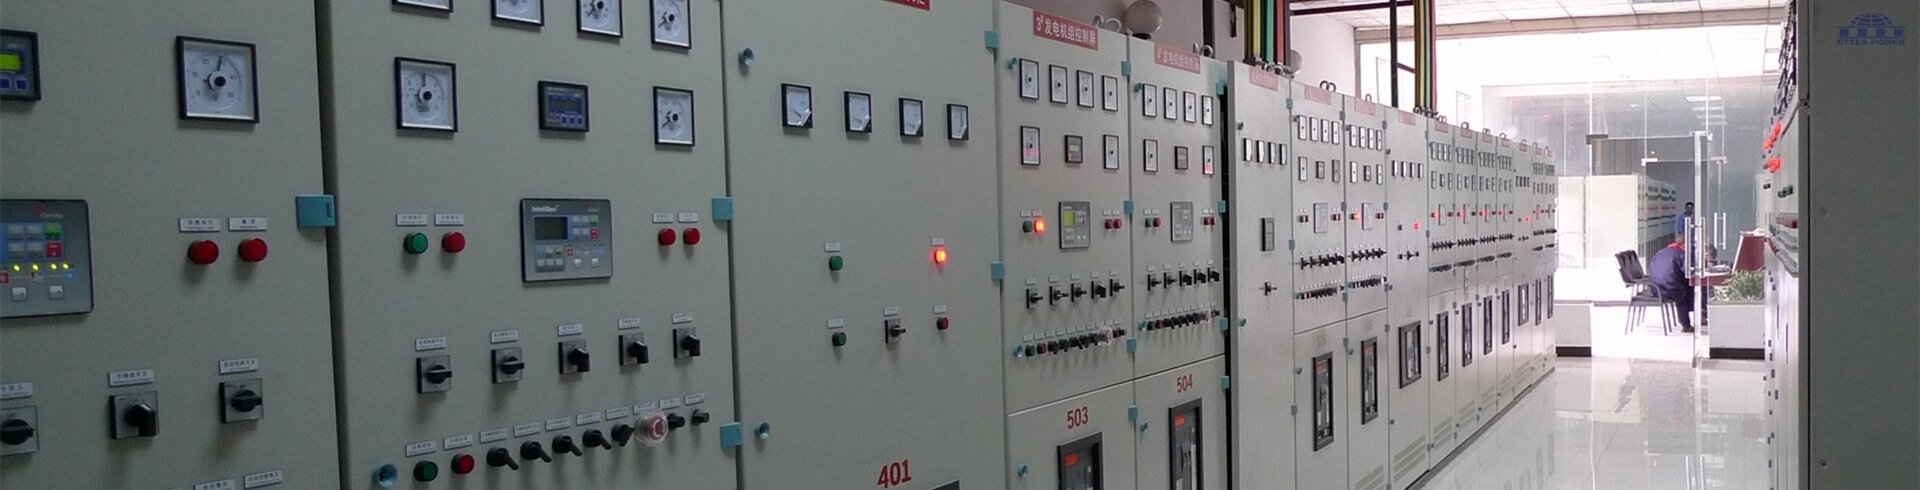 Control & switch gear cabinet & monitoring center for MAN MWM gas power station ETTES POWER